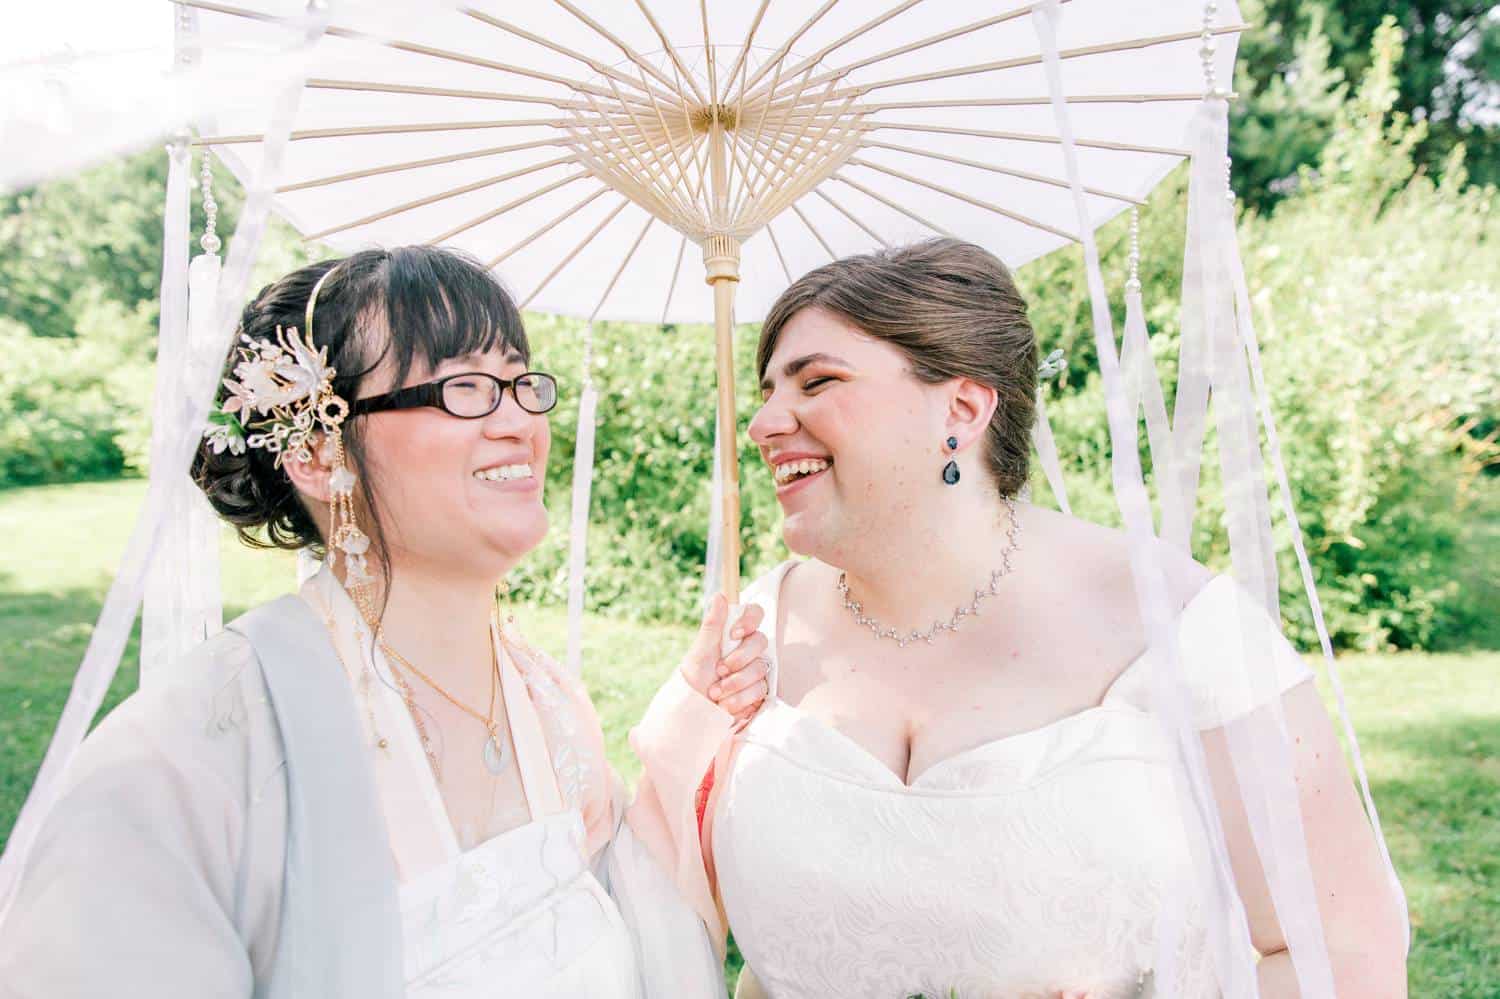 Two brides stand under a paper umbrella laughing